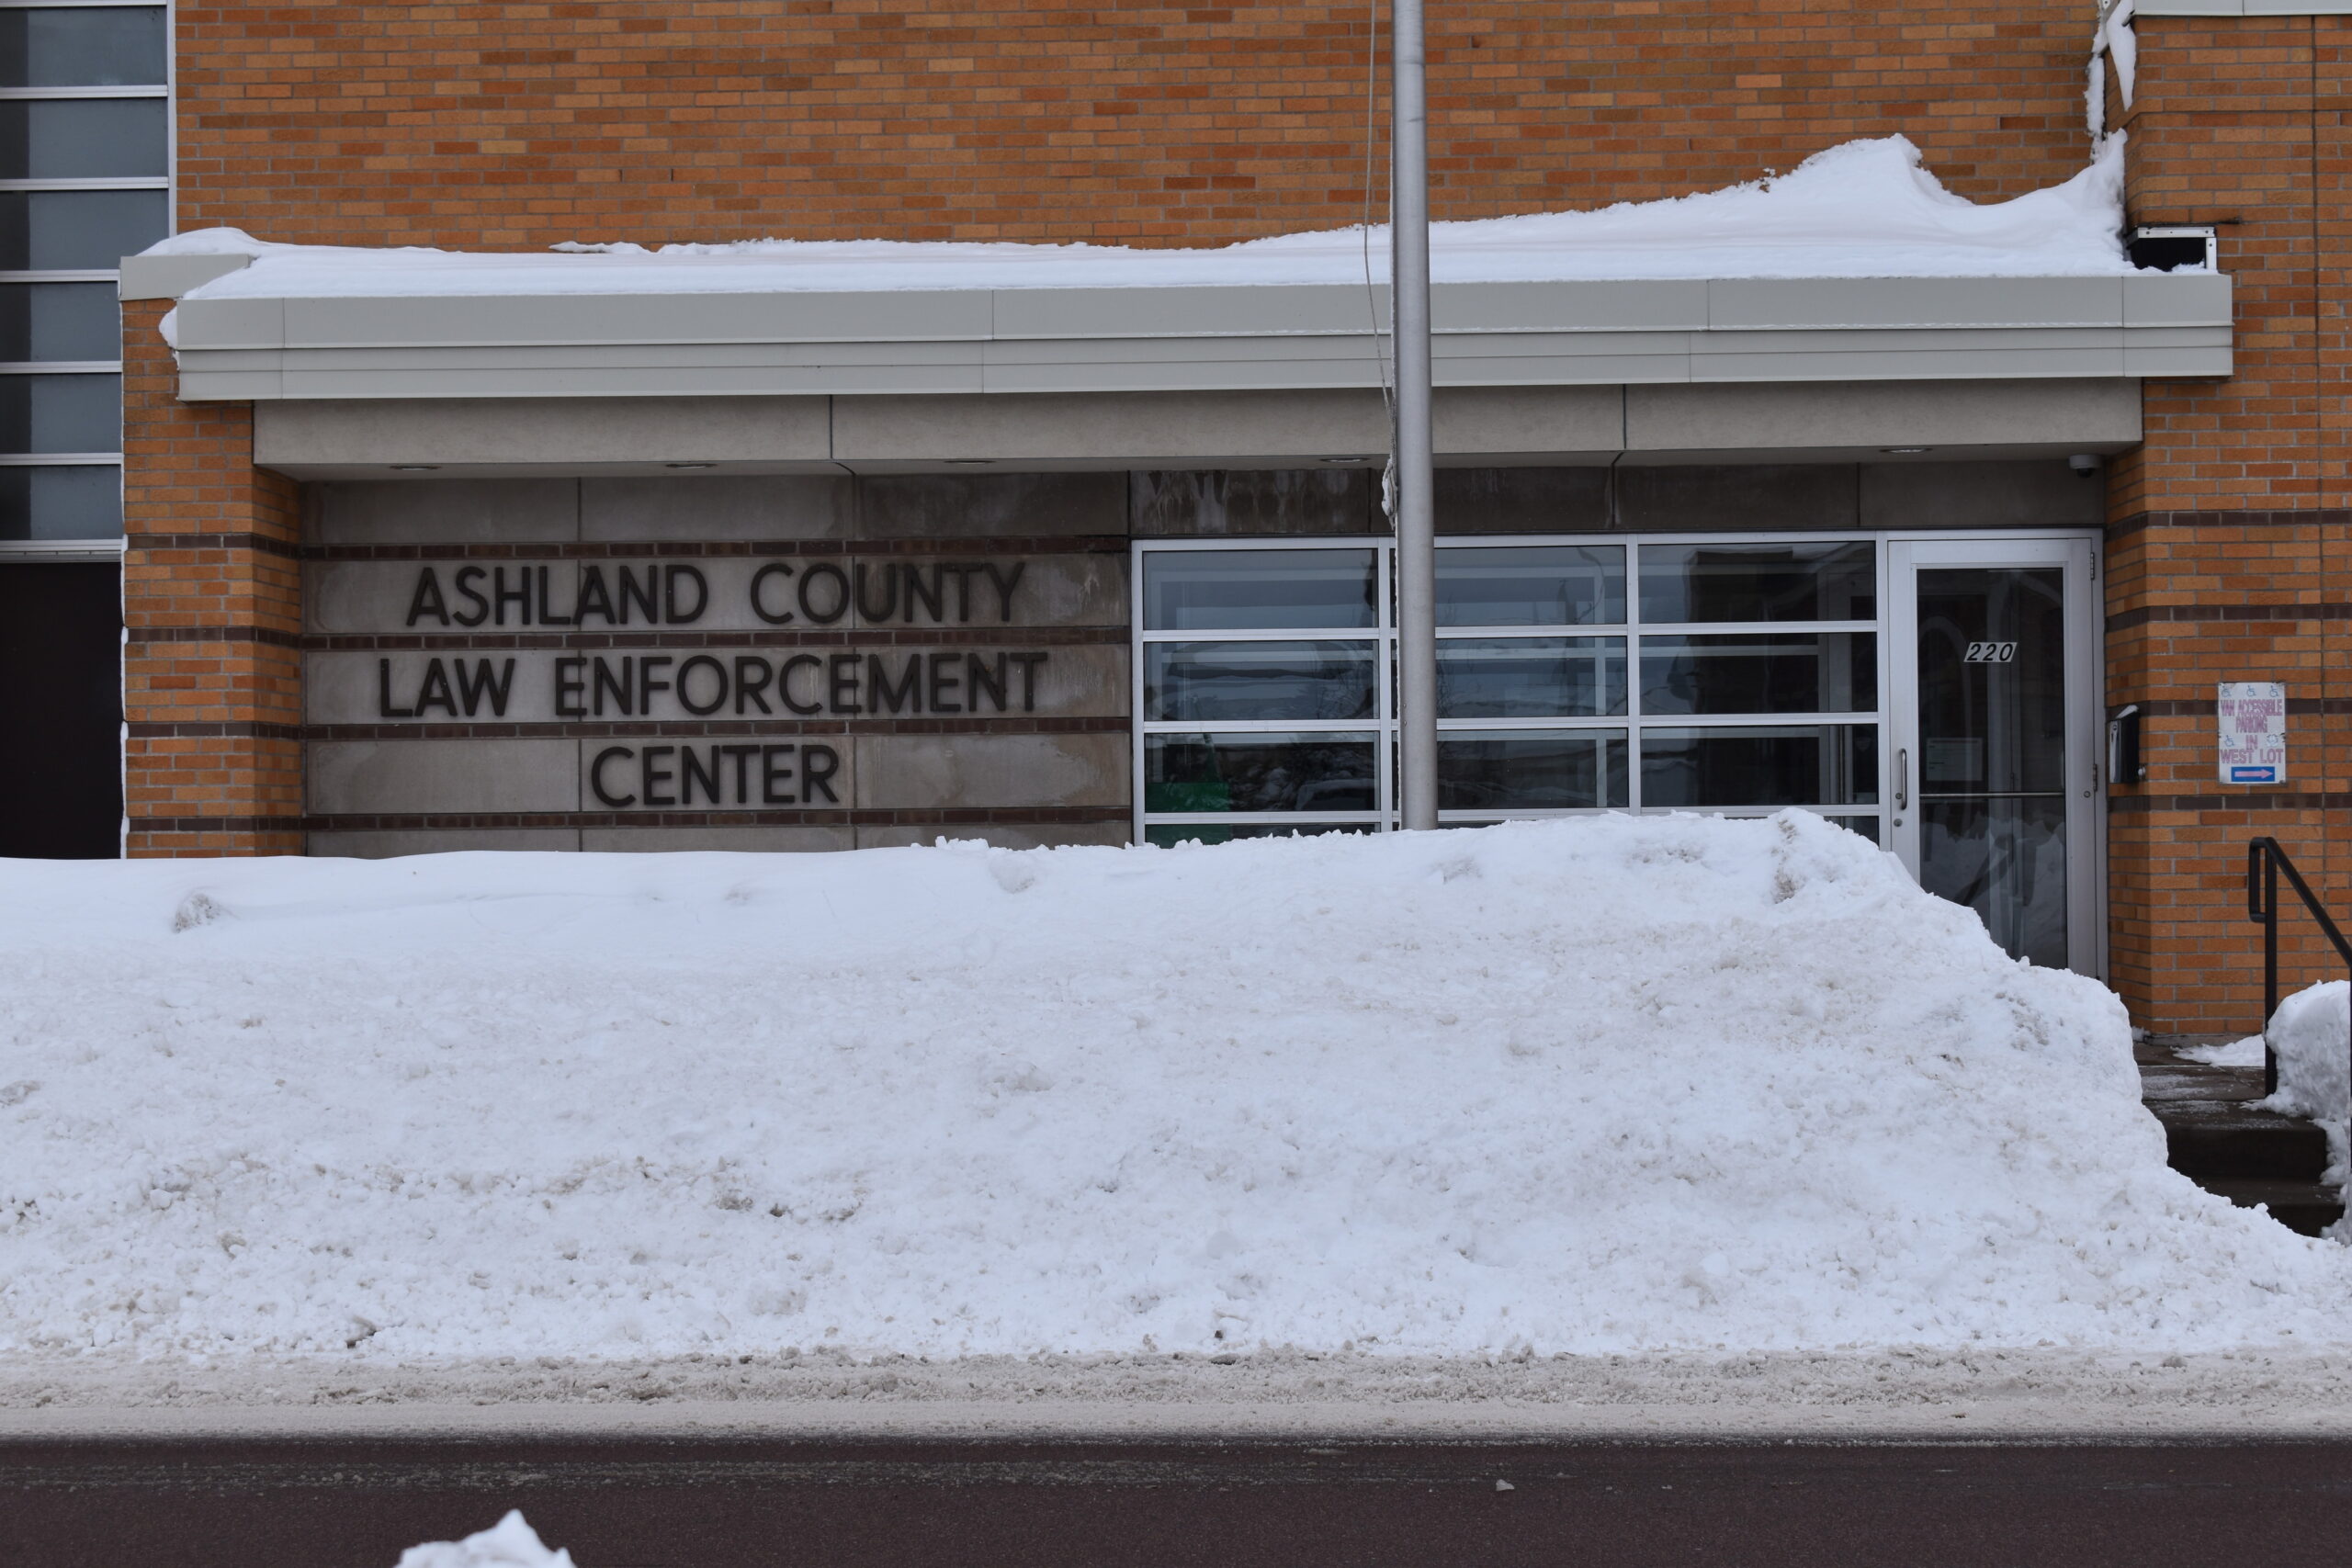 Ashland County nixes decades-long law enforcement deal, leaving a Lake Superior island town in the lurch